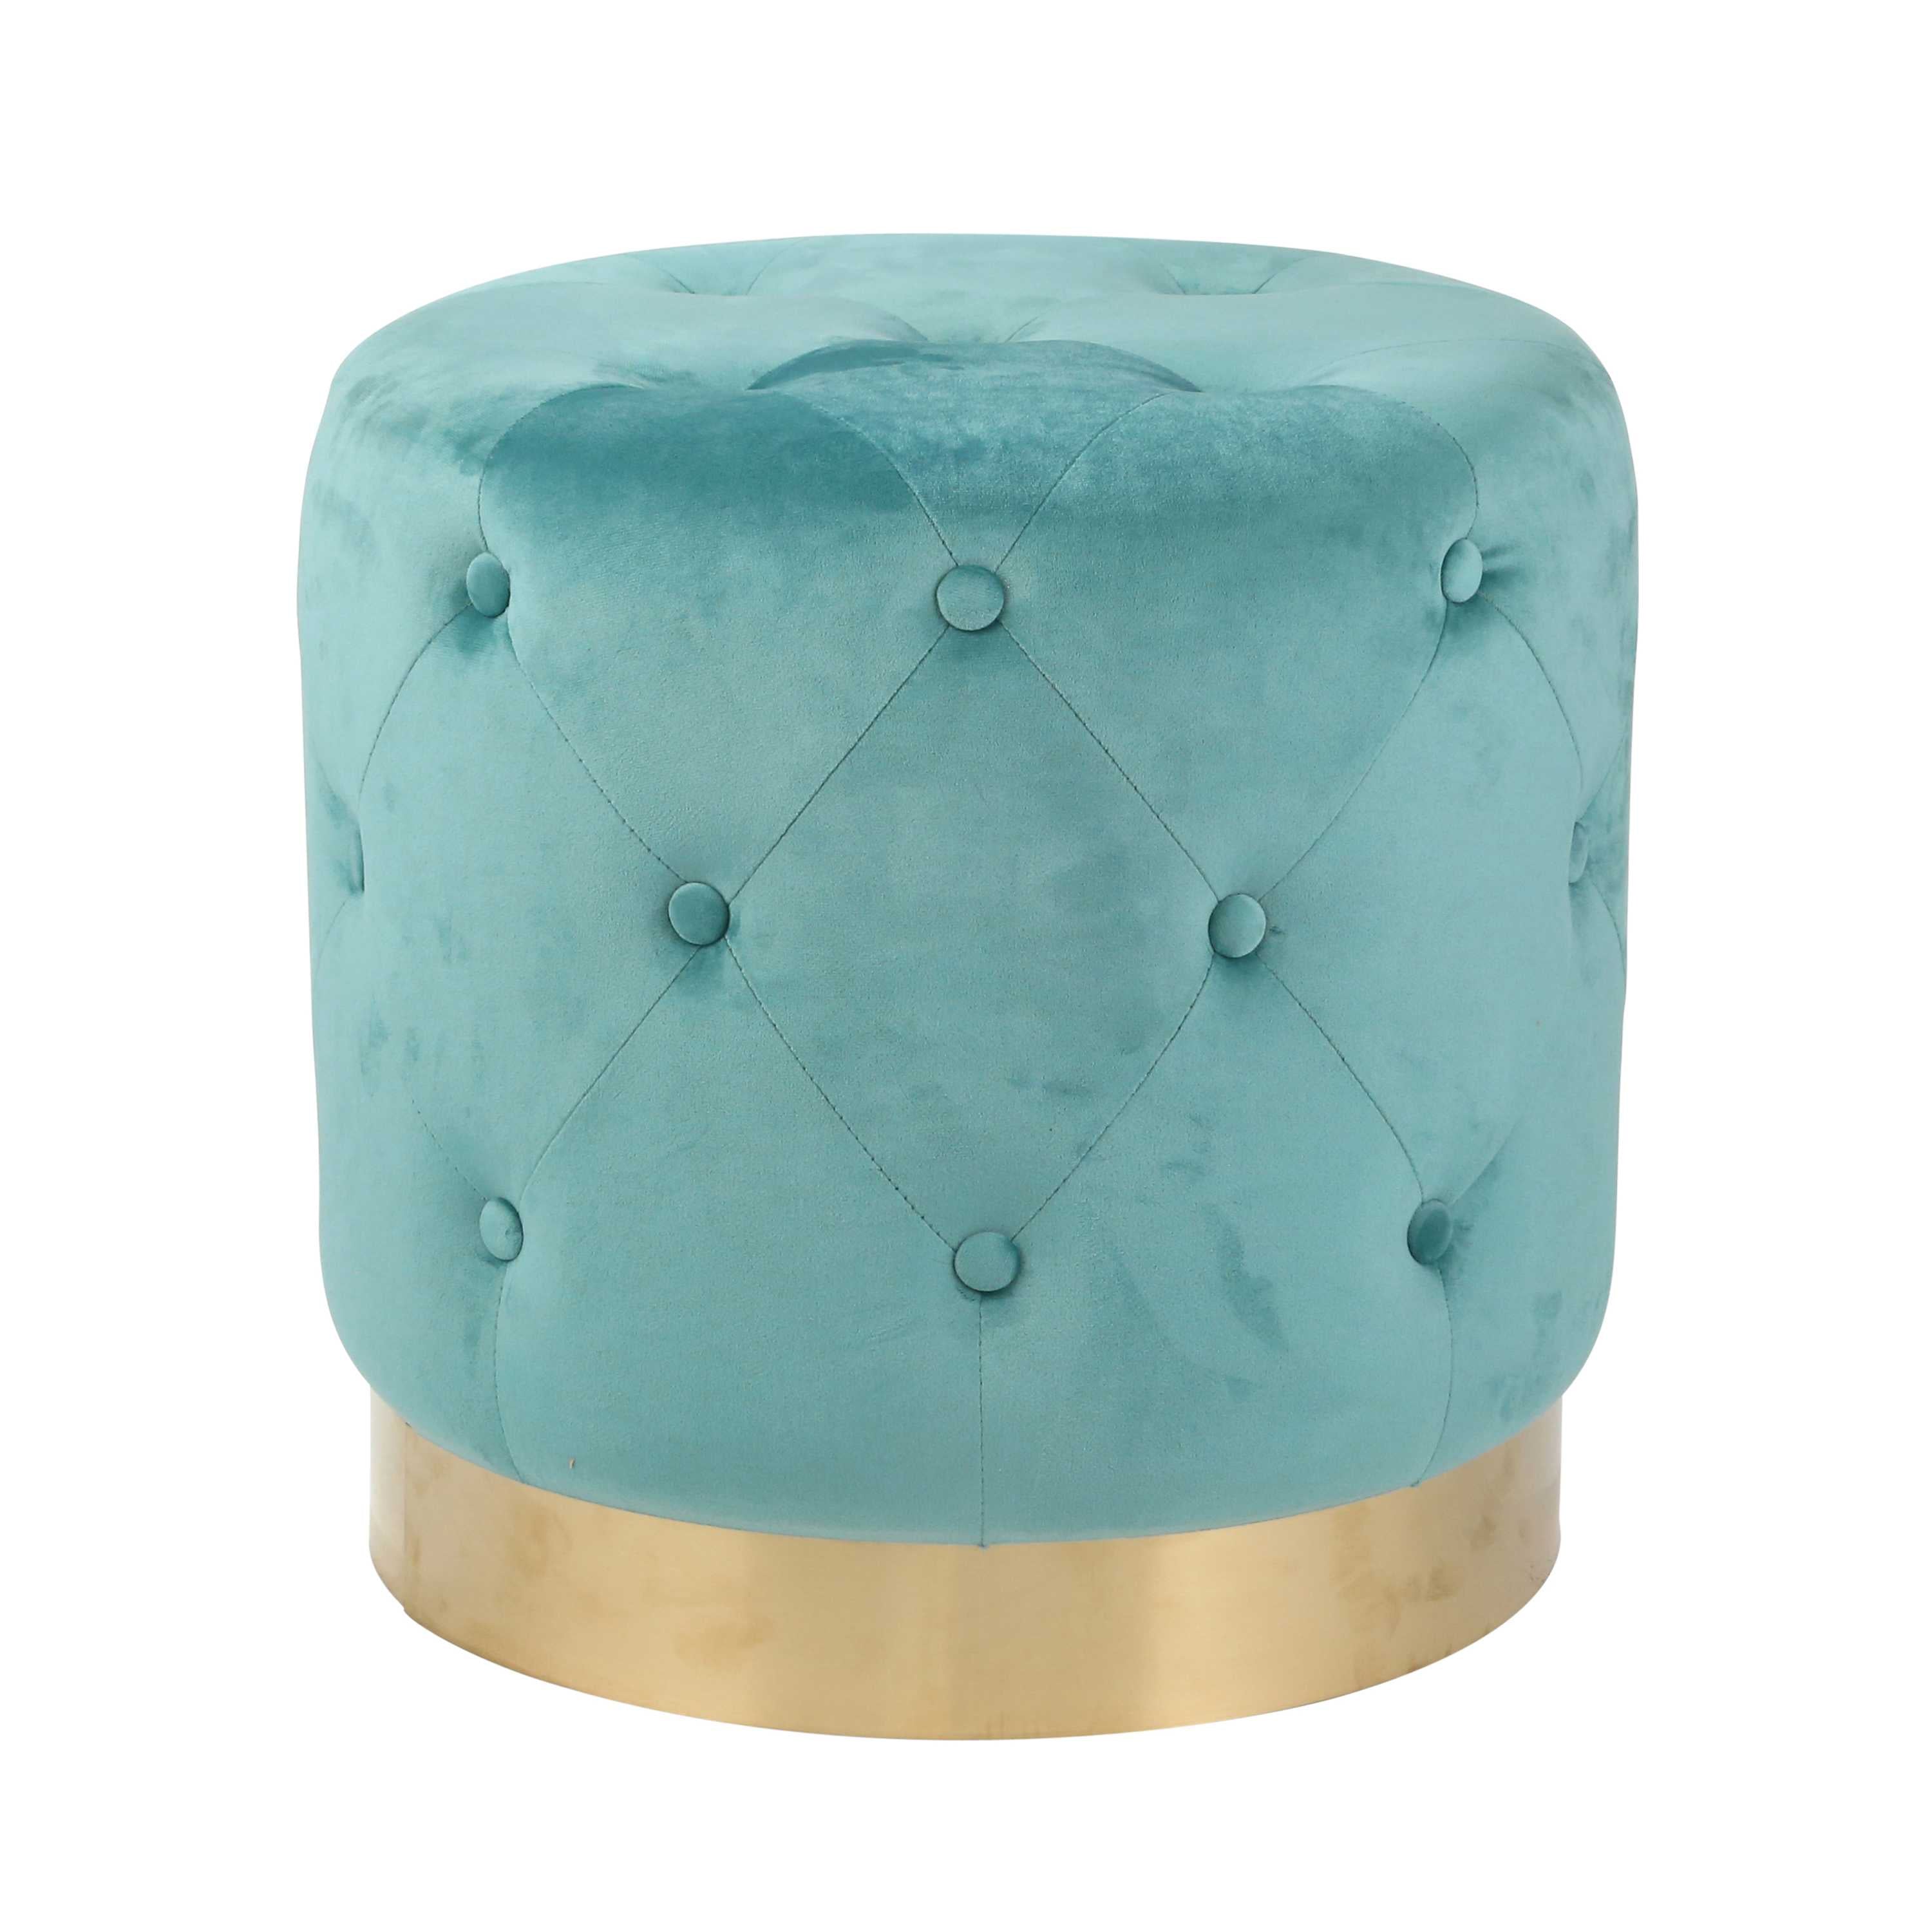 Fabric Upholstered Tufted Ottoman with Metal Base, Teal Blue and Gold